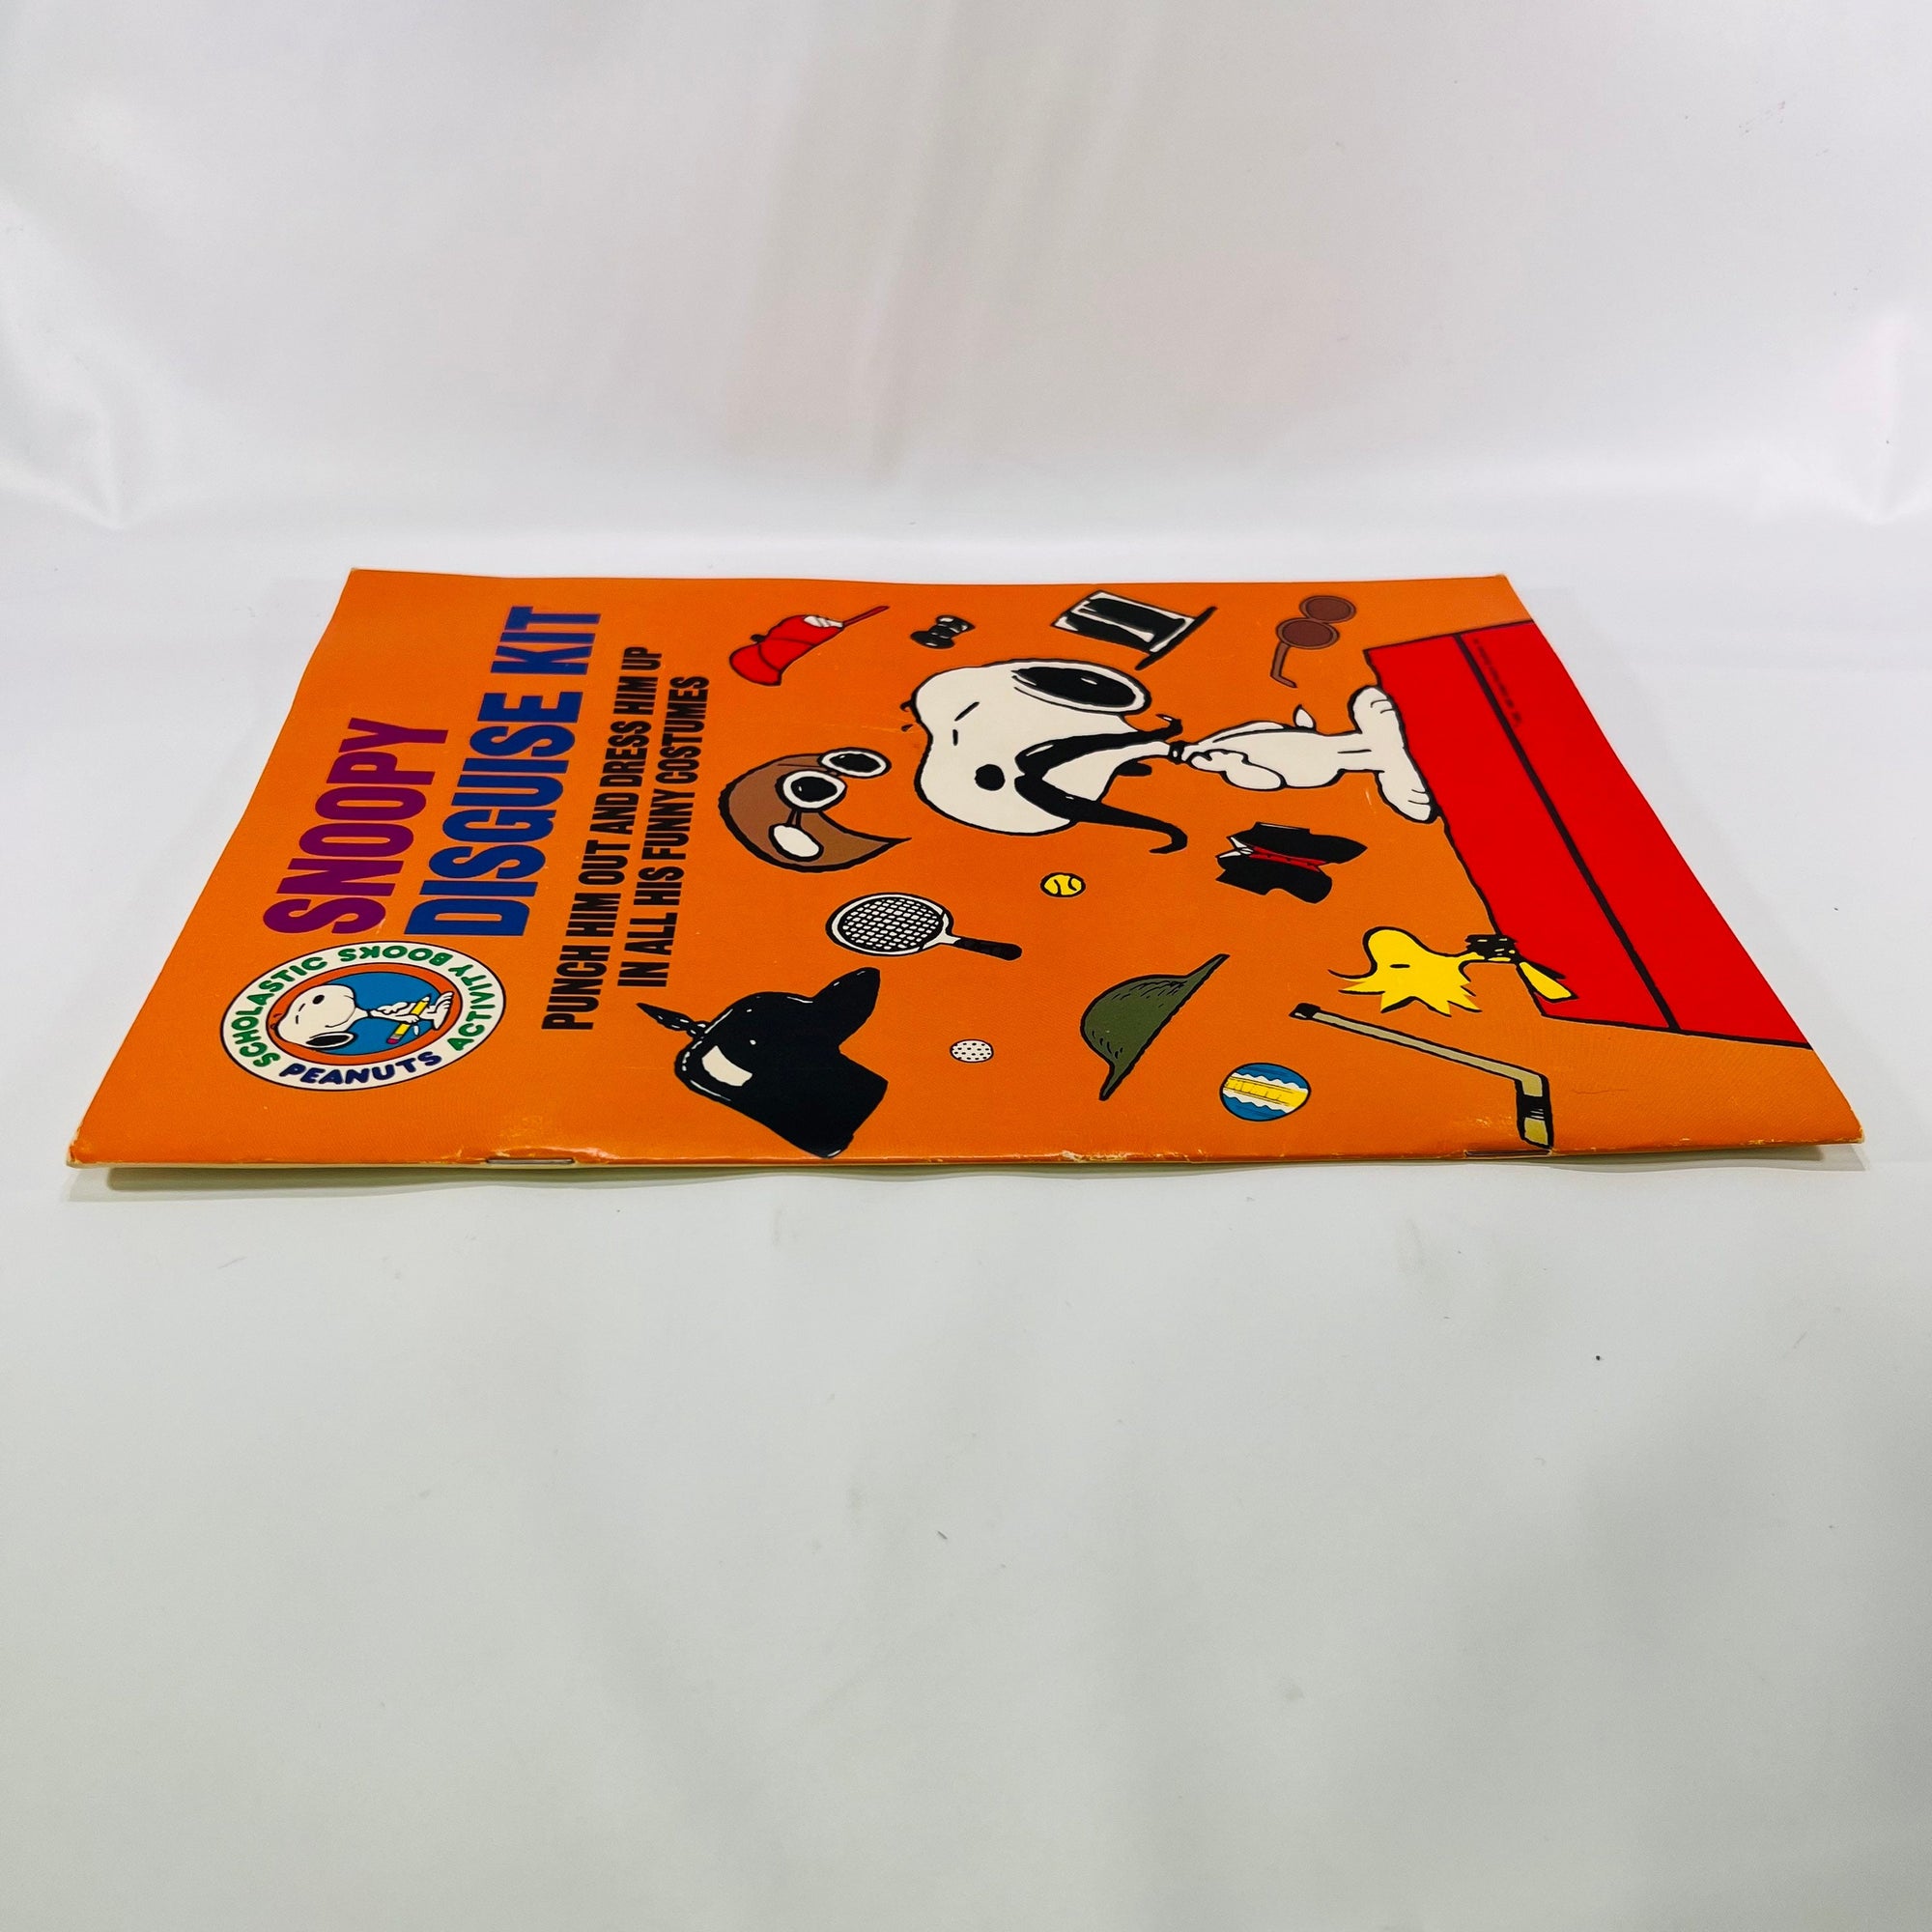 Snoopy Disguise Kit Vintage Peanuts Punch Him Out Paper Doll Activity Funny Costumes Scholastic Books 1982 United Feature  Syndicate Inc